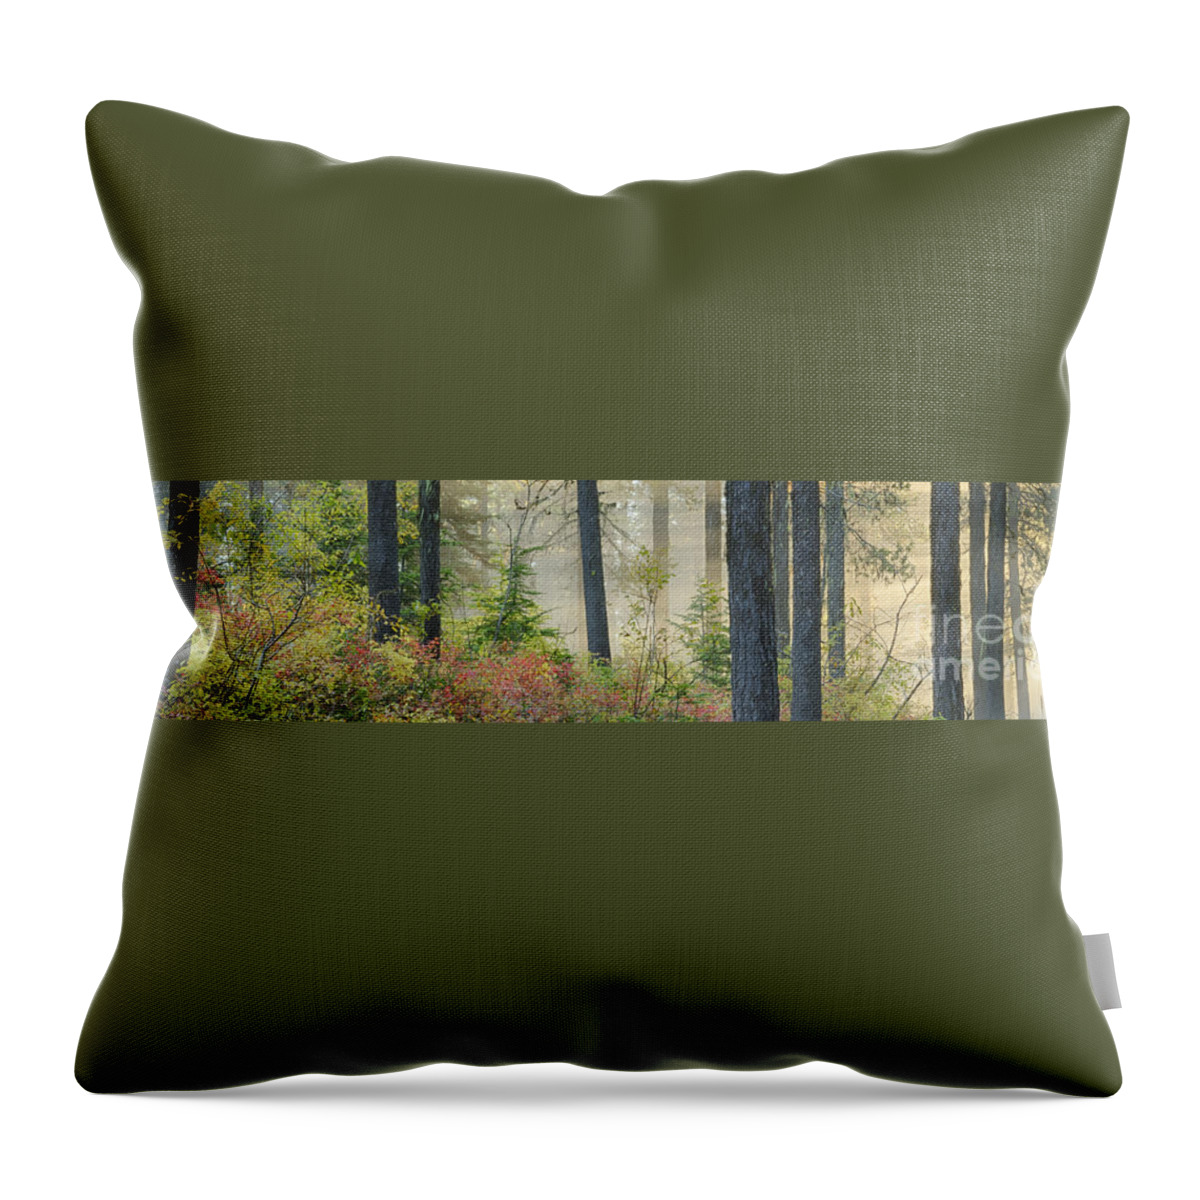 Coeur D'alene Mountains Throw Pillow featuring the photograph Berry Patch Pano by Idaho Scenic Images Linda Lantzy